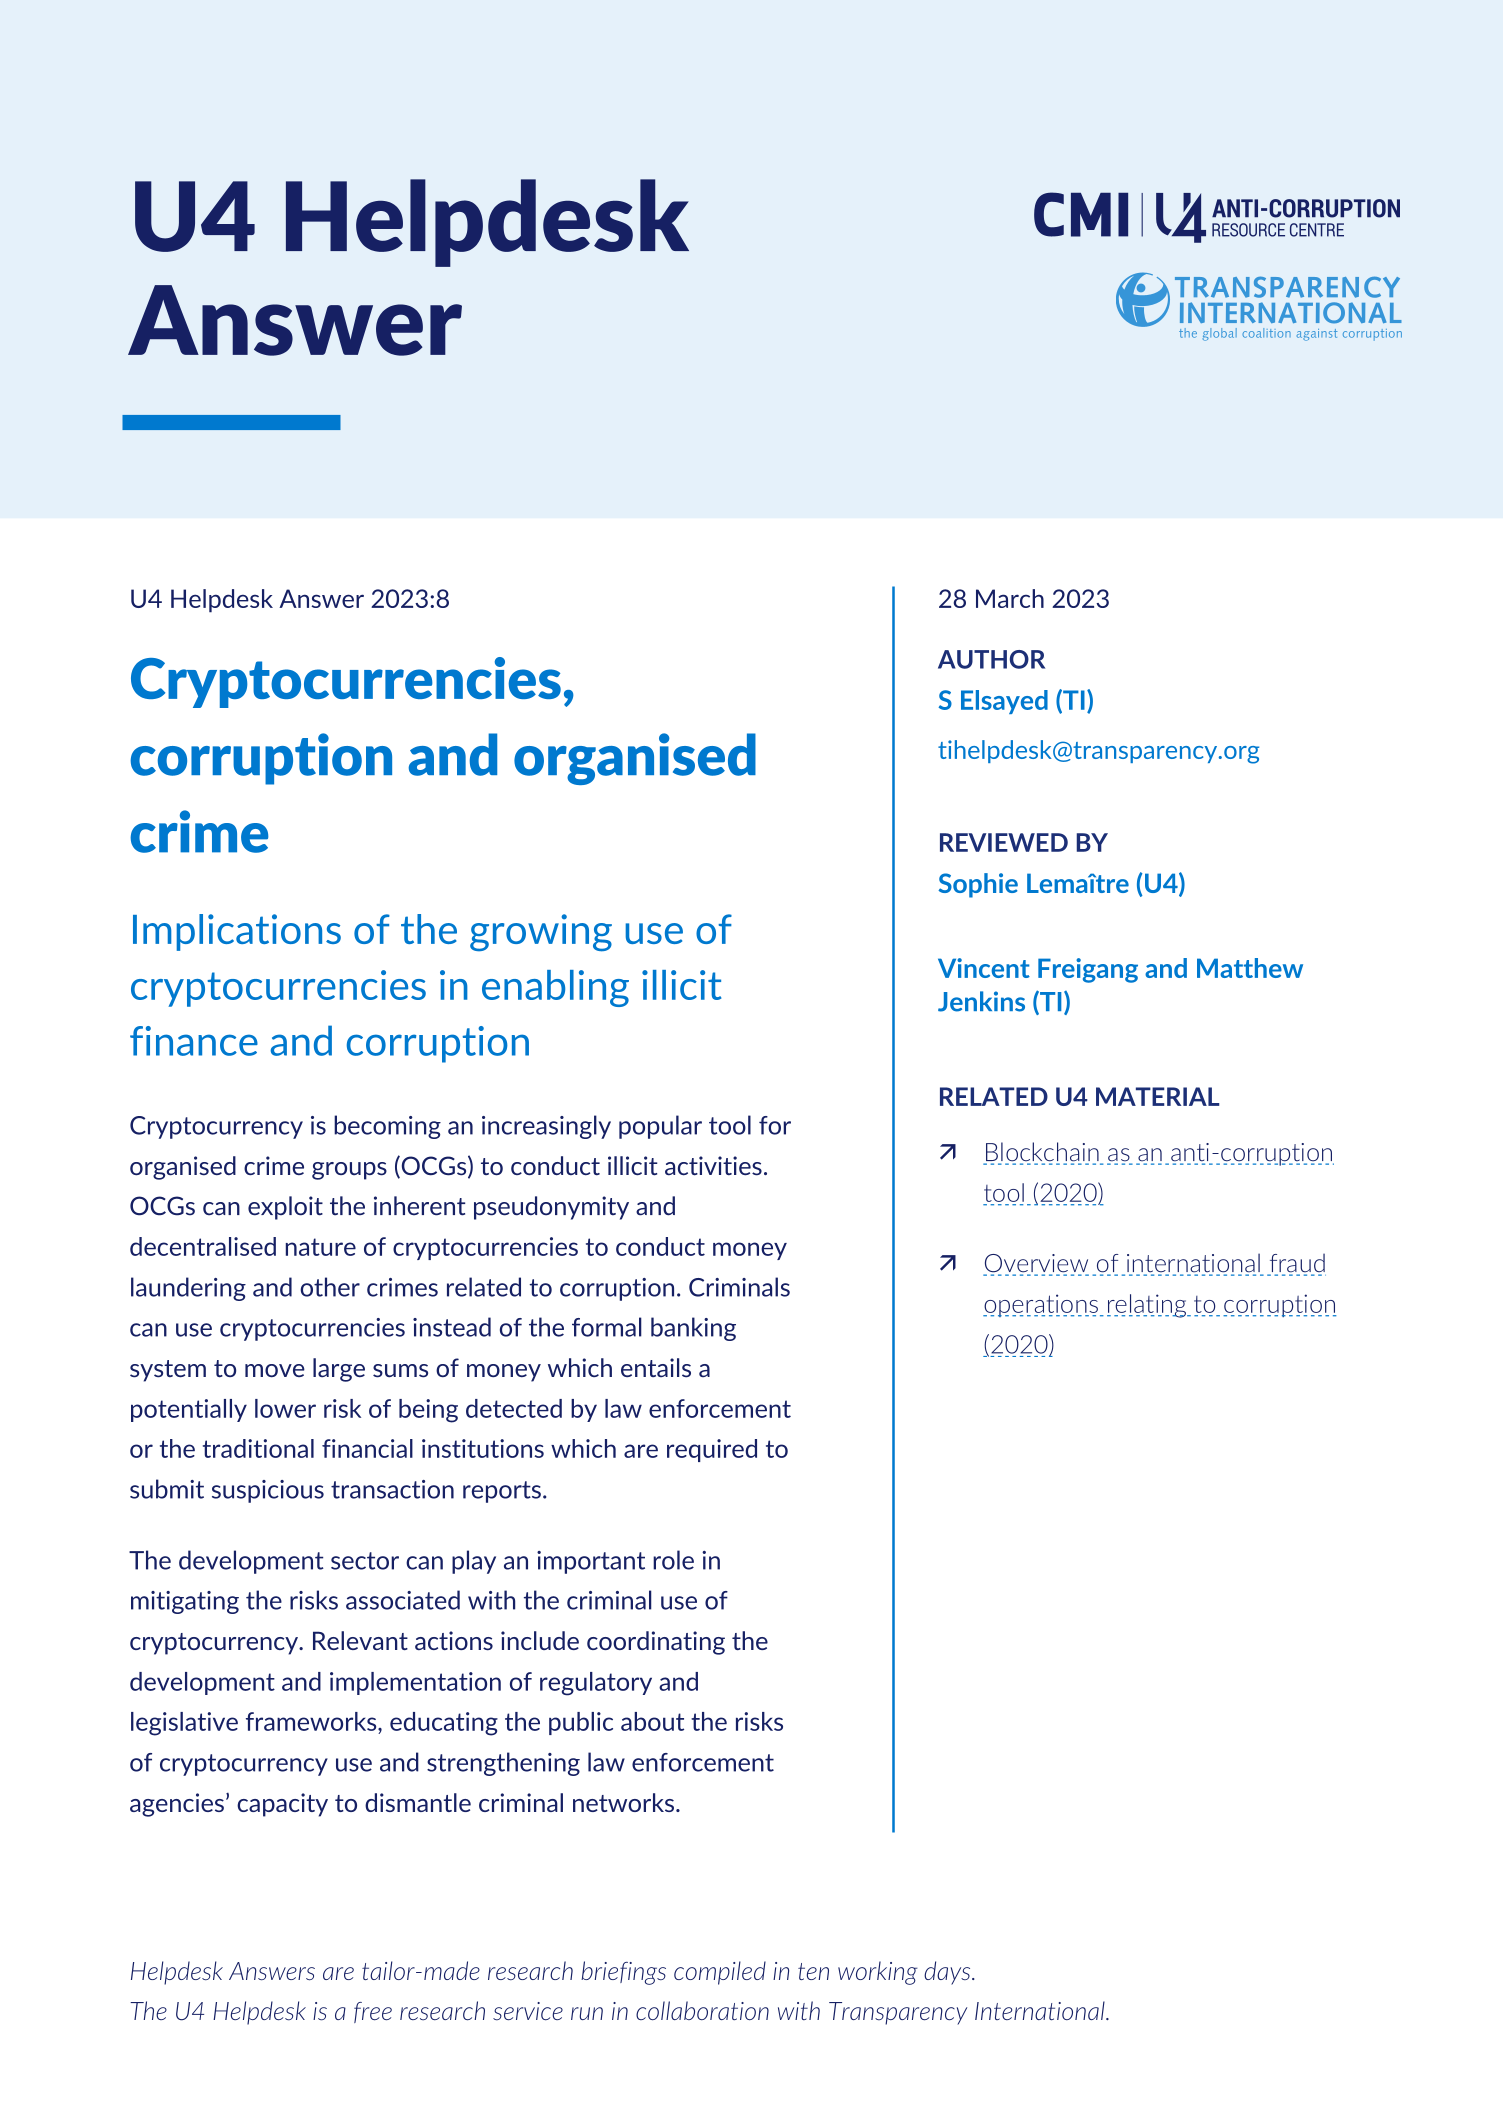 Cryptocurrencies, corruption and organised crime